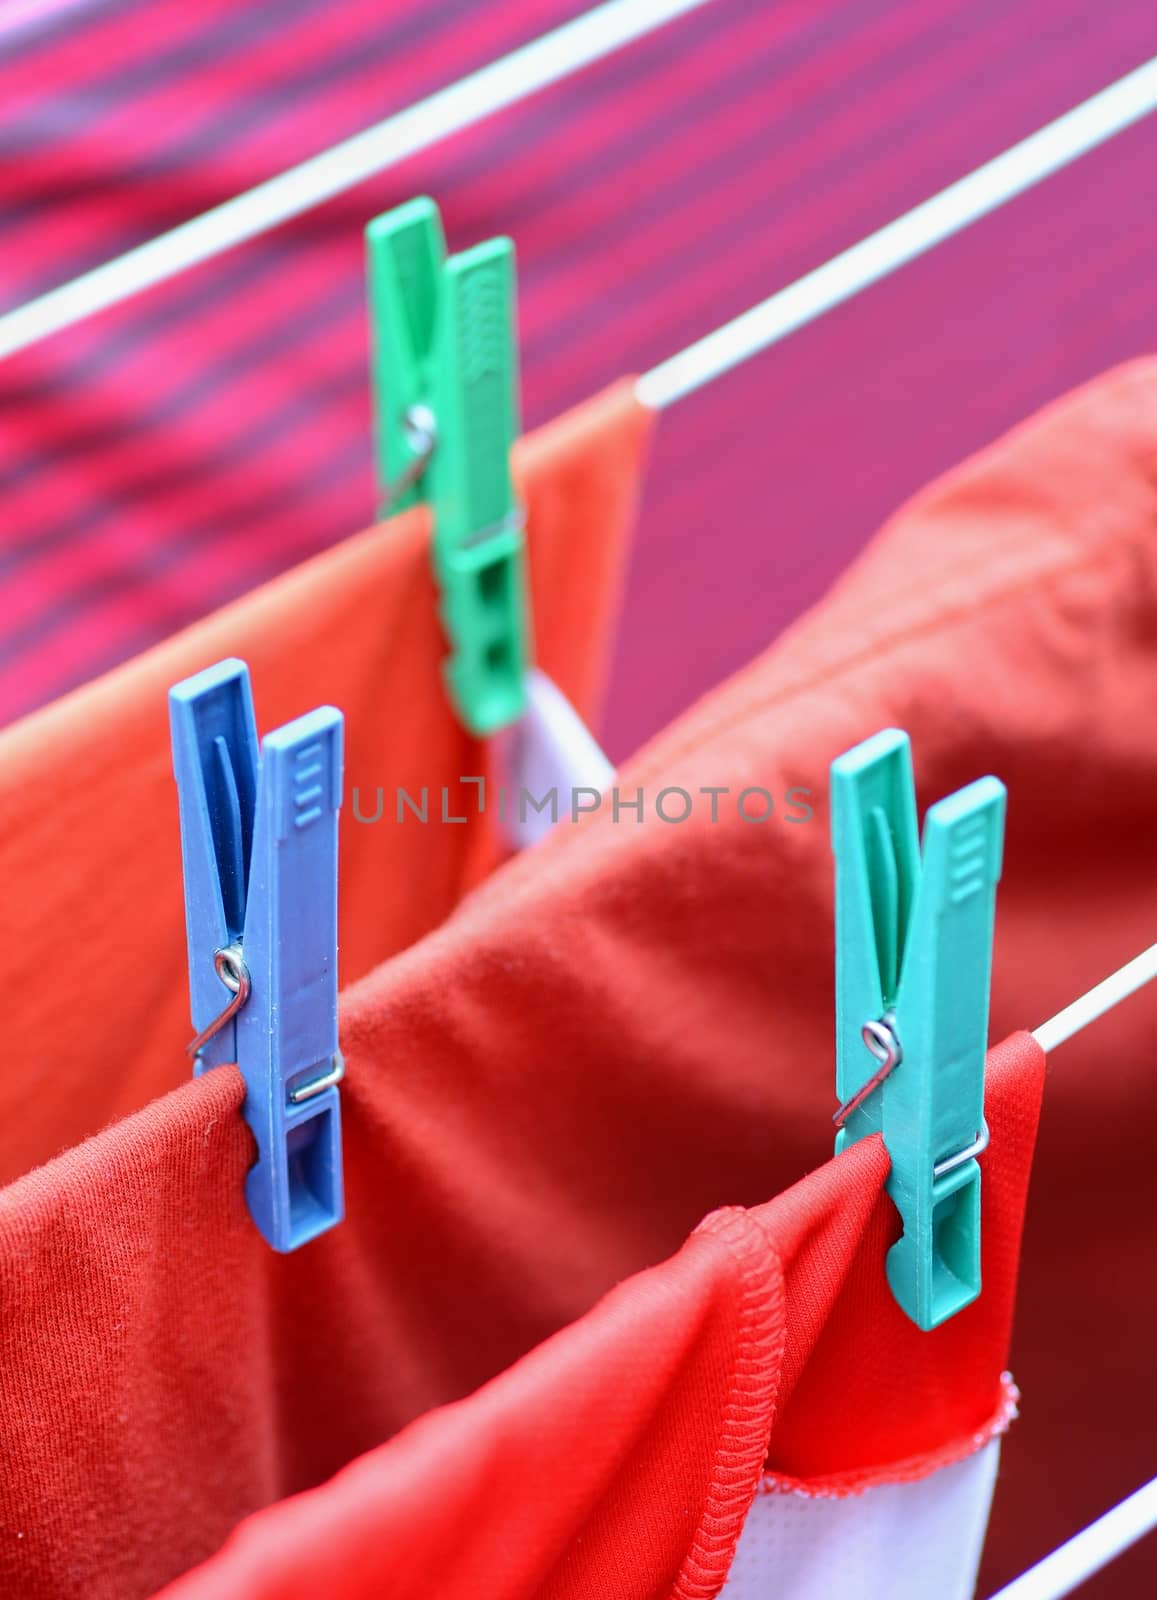 Clothespins on clothesline securing the red wet clothes. Red wet clothes drying on clothesline securing with clothespins.